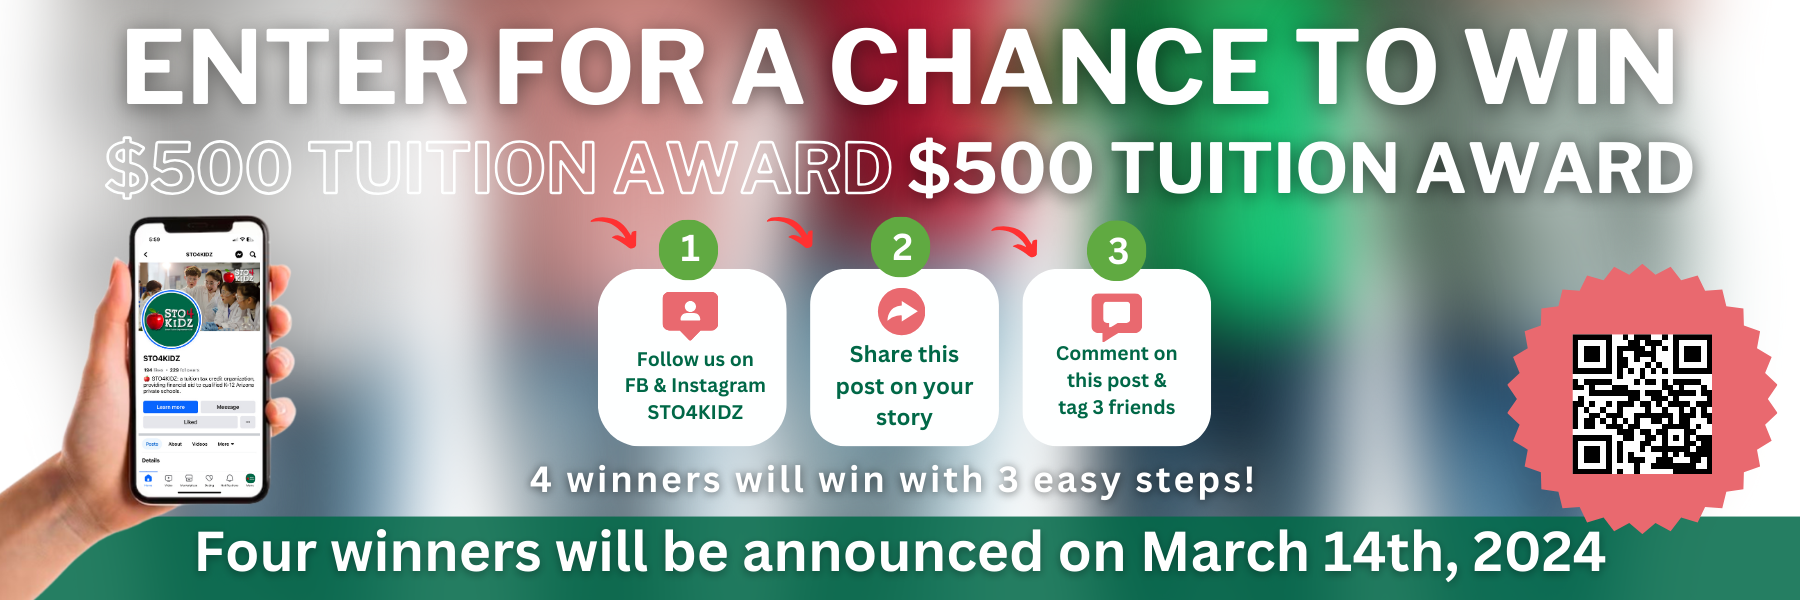 STO4KIDZ Enter for a chance to win $500 in tuition.